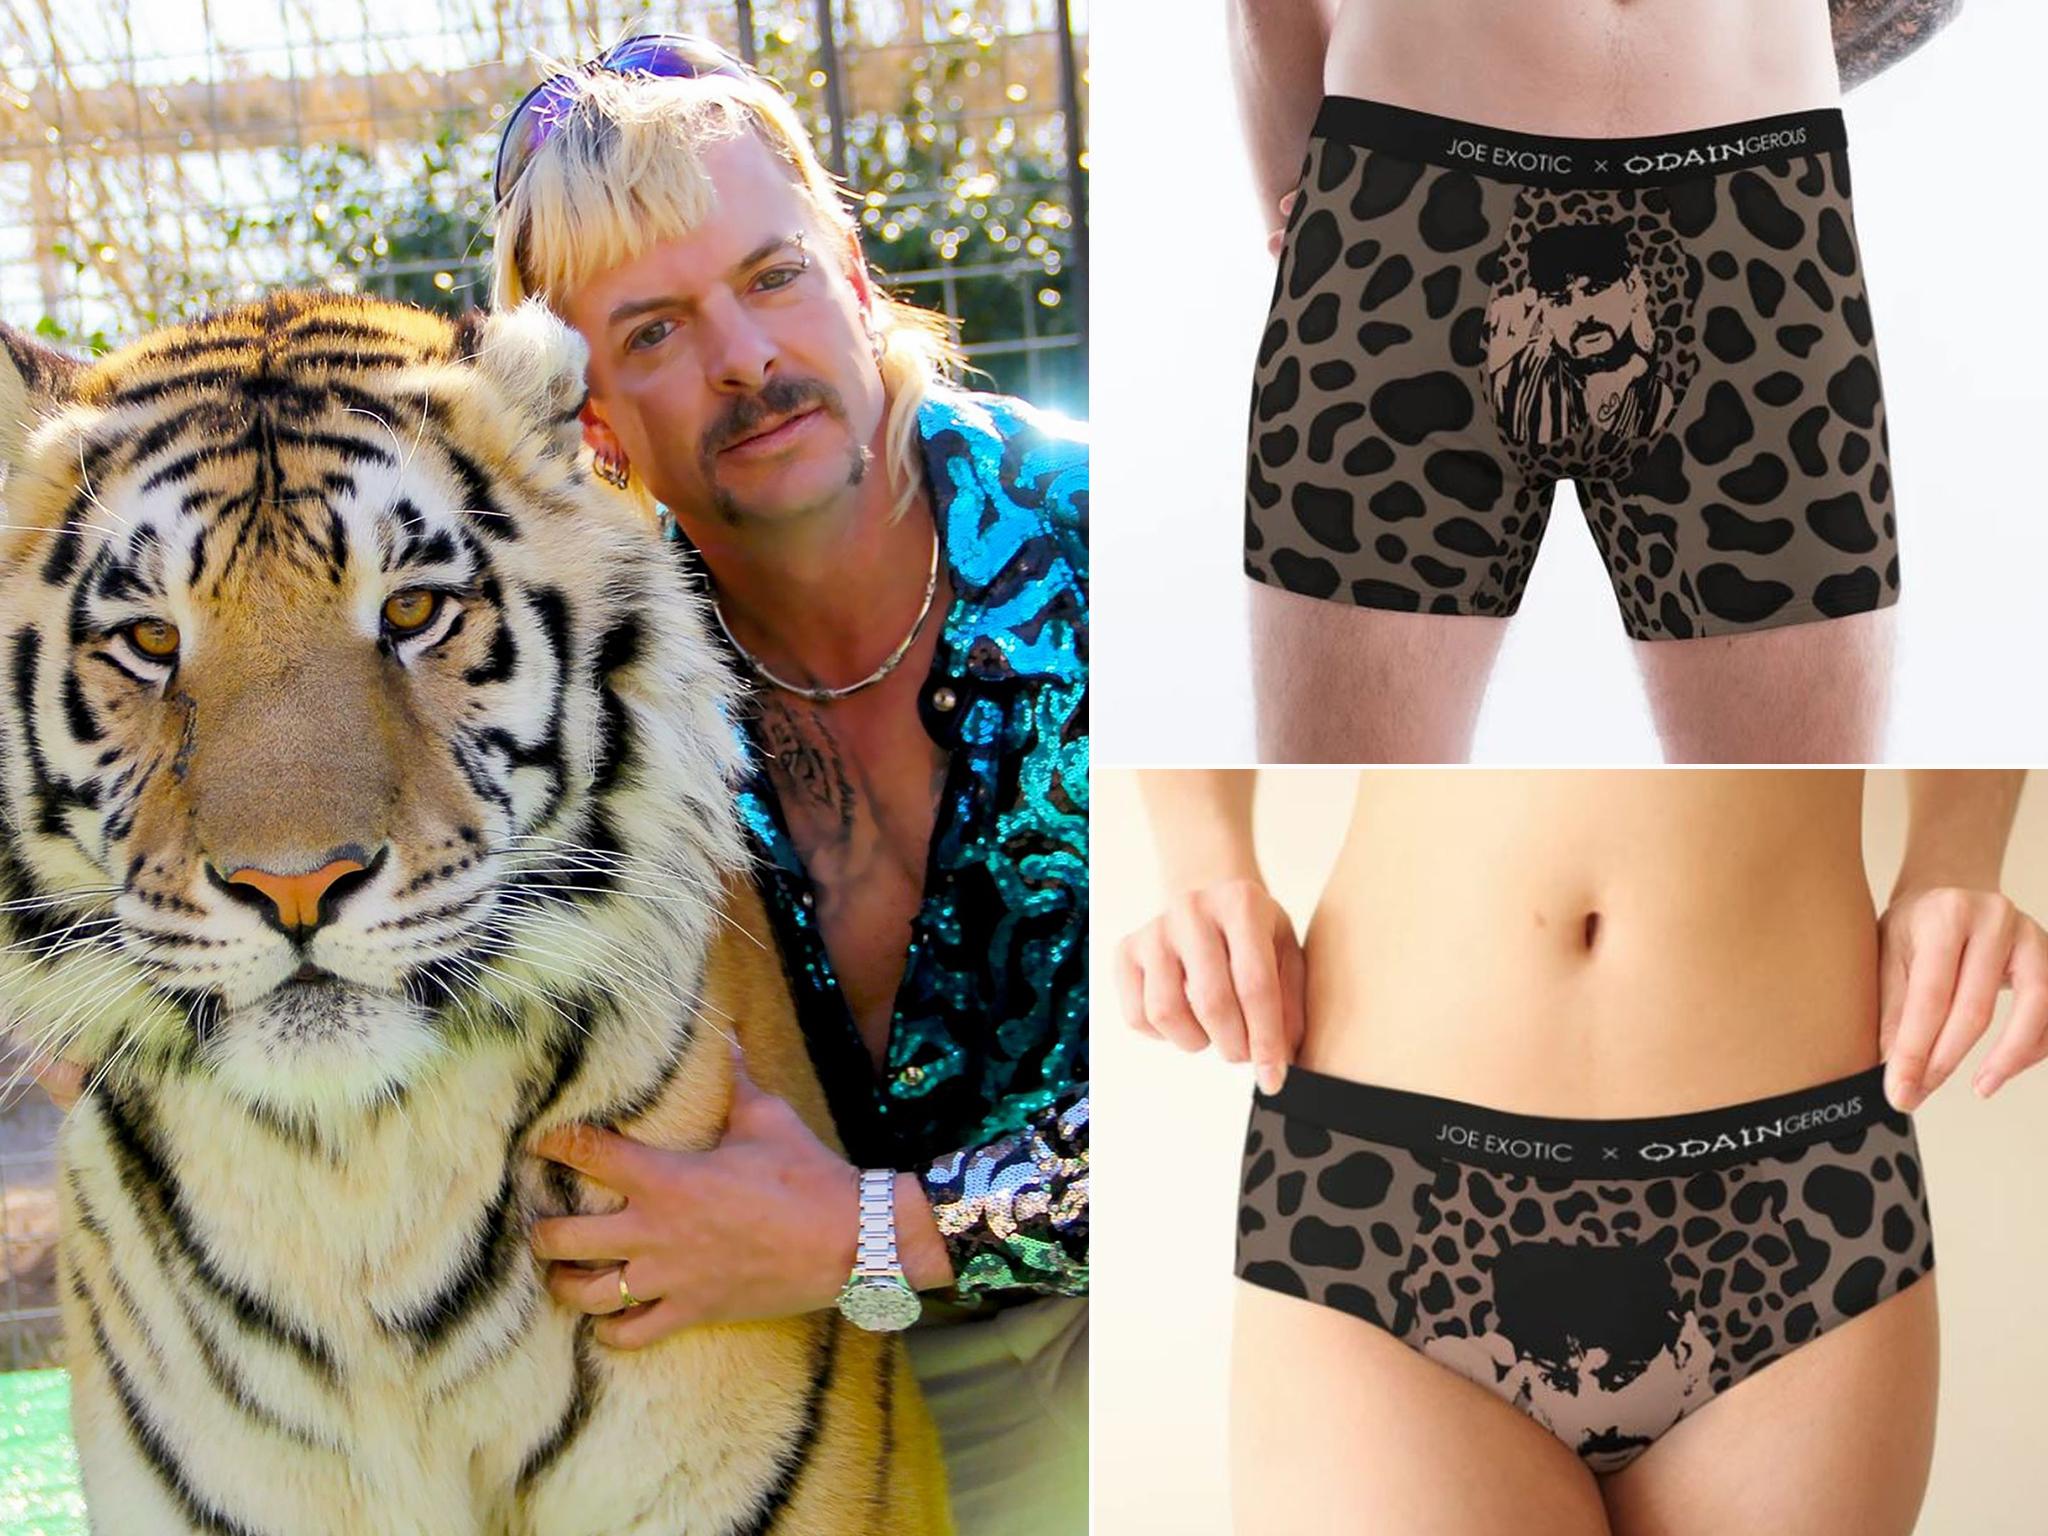 Joe Exotic releases 'Tiger King' underwear fronted by his face, The  Independent